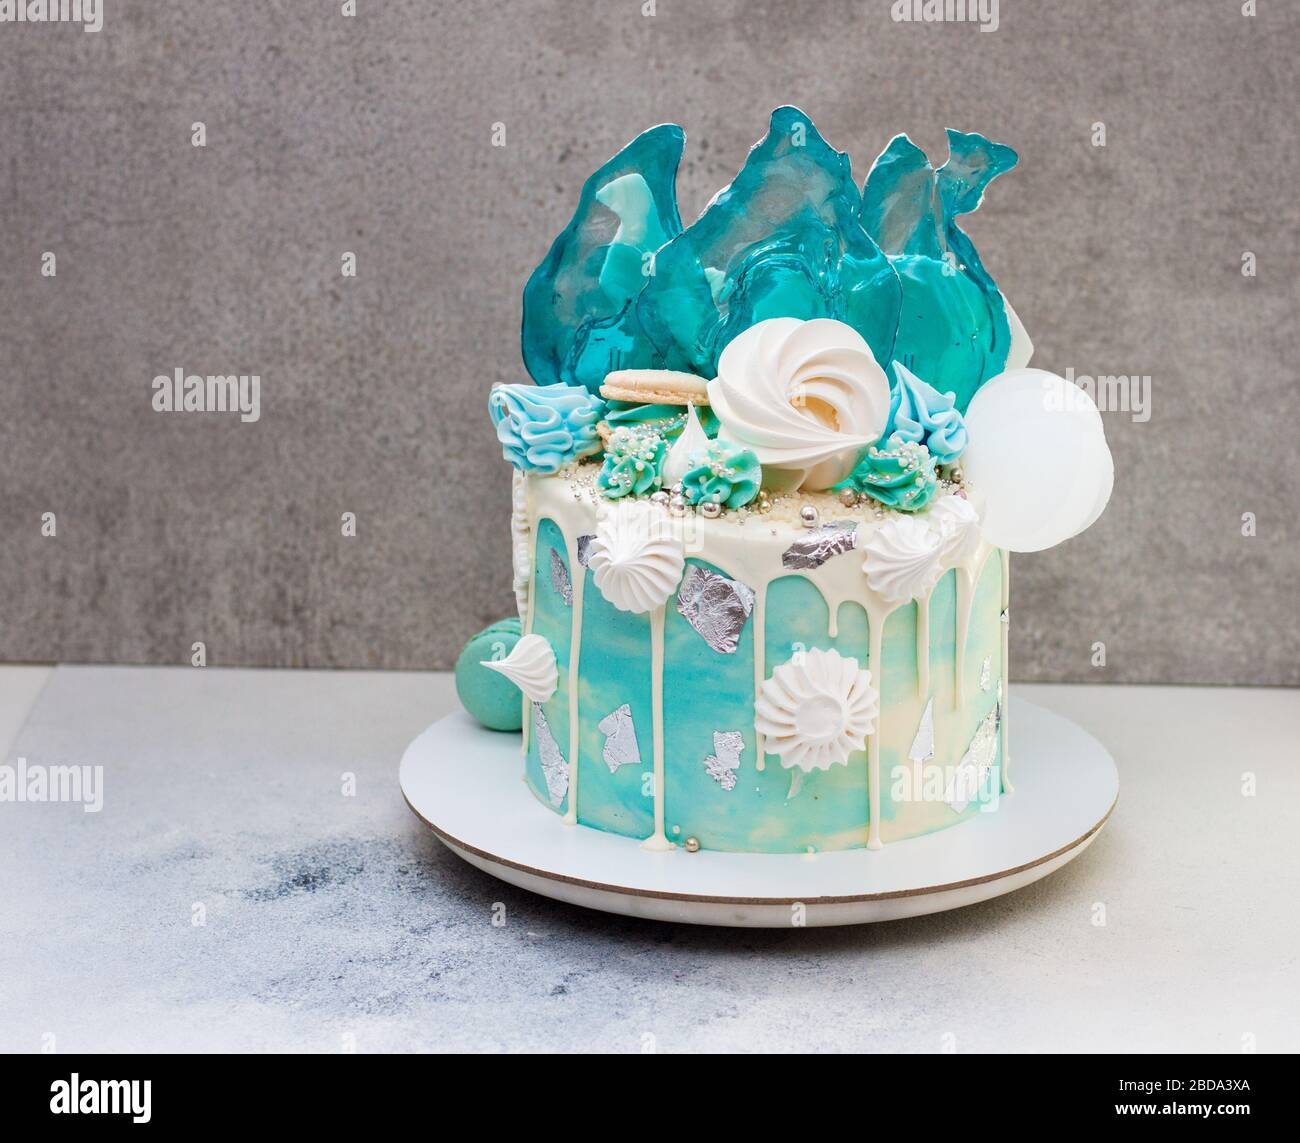 Mermaid Cake - Order online and have it delivered to your doorstep